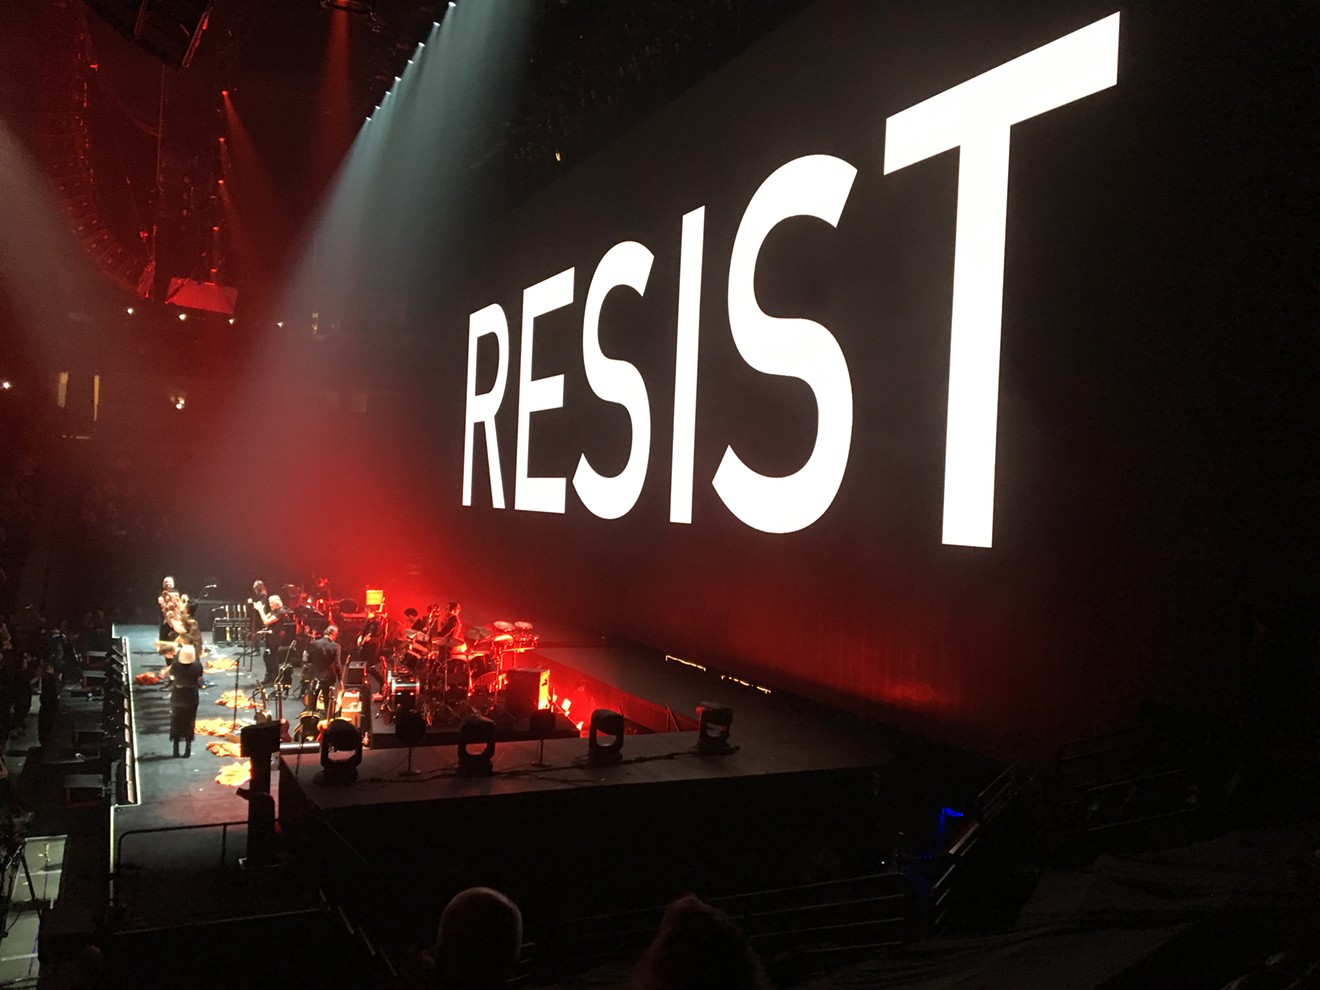 Roger Waters played the Pepsi Center on June 3. His concert had one message when it came to Donald Trump: "Resist."